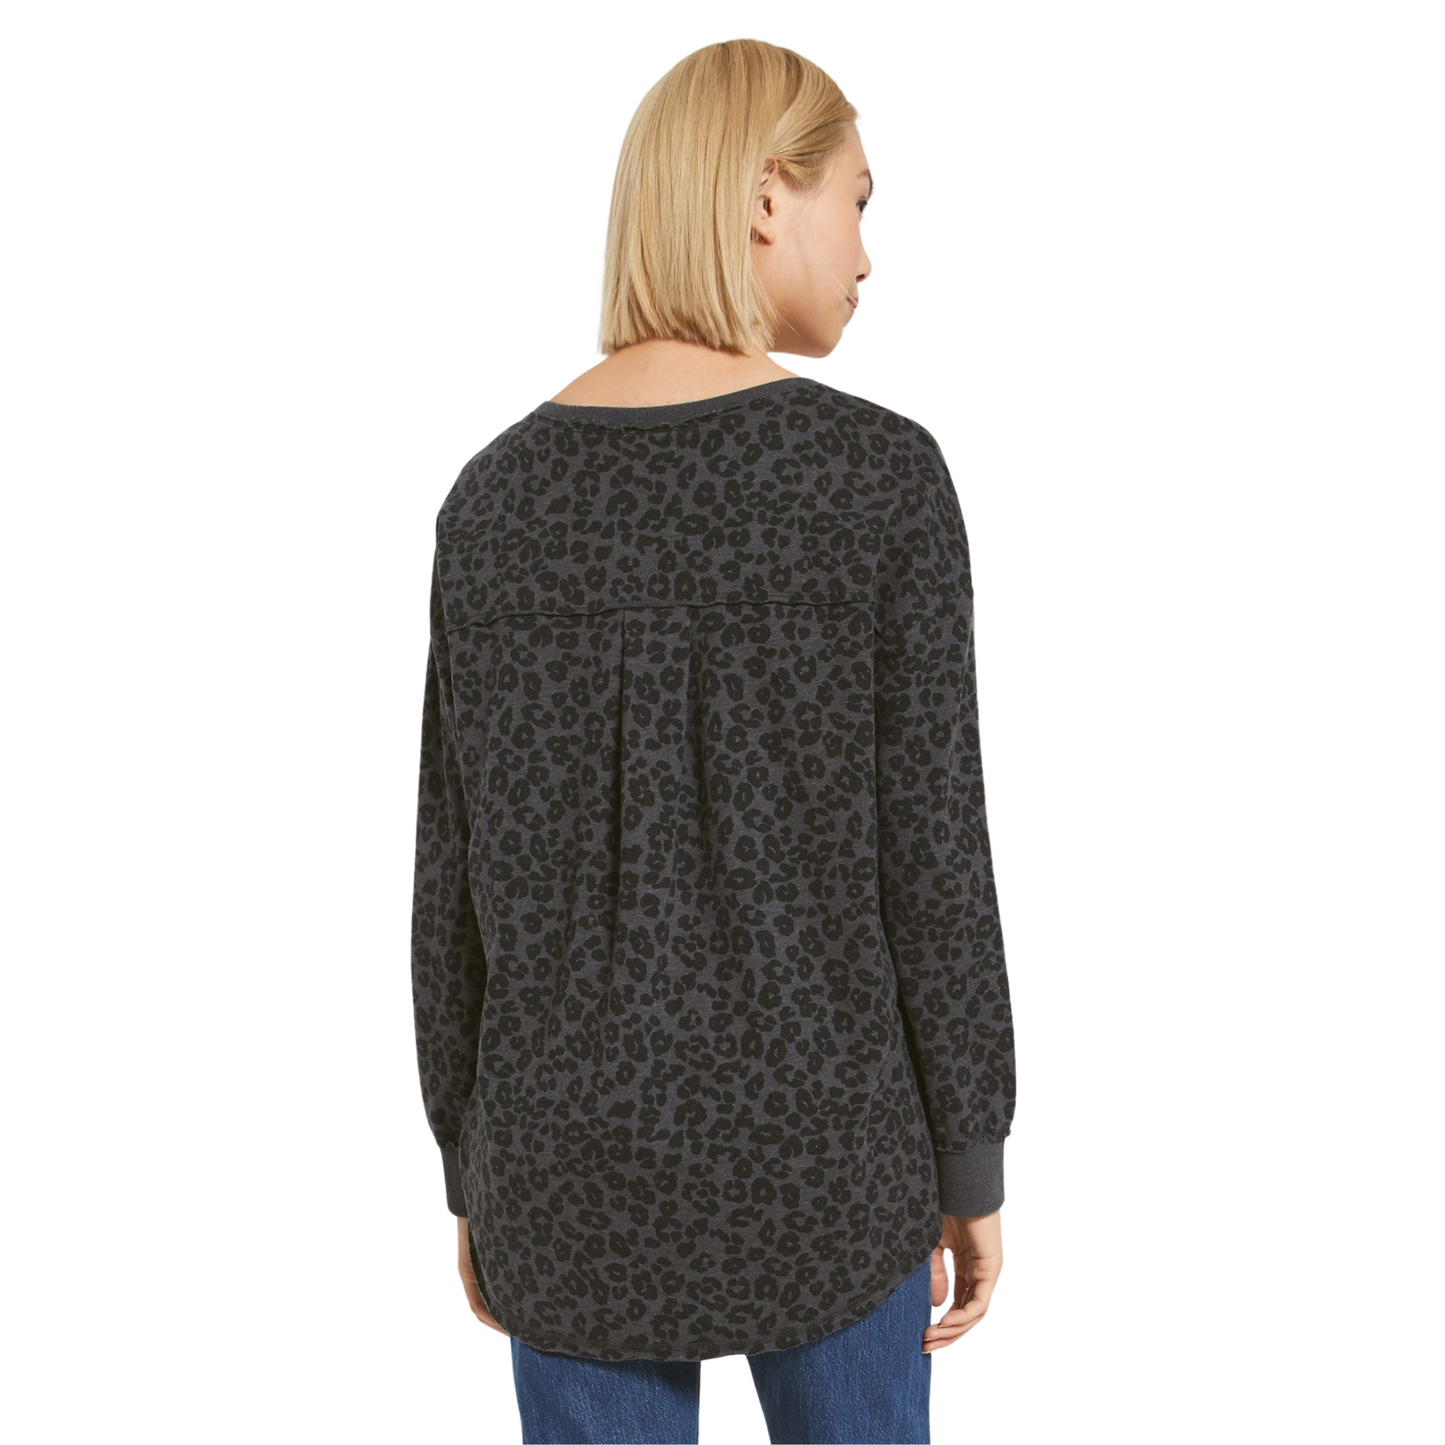 Look chic and on-trend in our V-Neck Weekender Top. This black top showcases an on-trend animal print, and its long sleeves provide coverage when needed. Perfect for any occasion, this top will keep you looking your best all day.